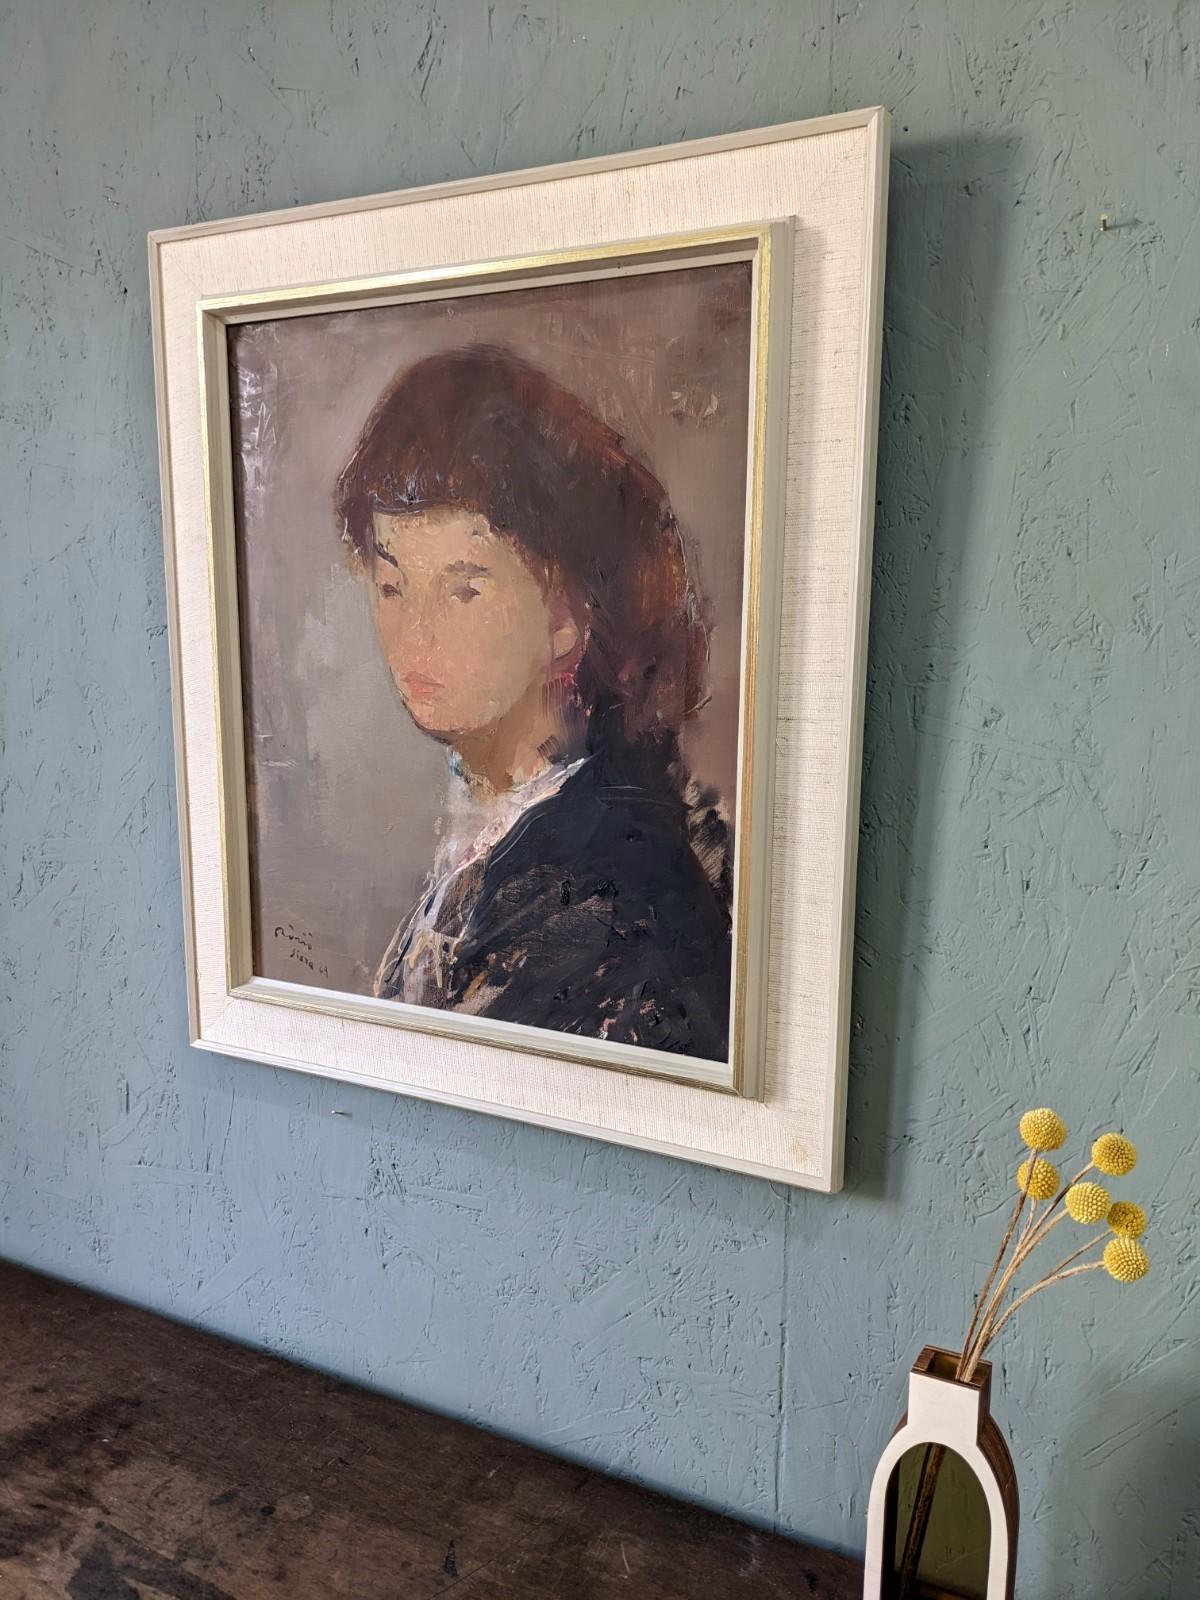 AUBURN HAIR
Size: 58.5 x 50 cm (including frame)
Oil on canvas

A very charming expressionist portrait in oil, painted in 1969.

This oil composition features a portrait of a female figure with auburn hair, against a similarly coloured background.